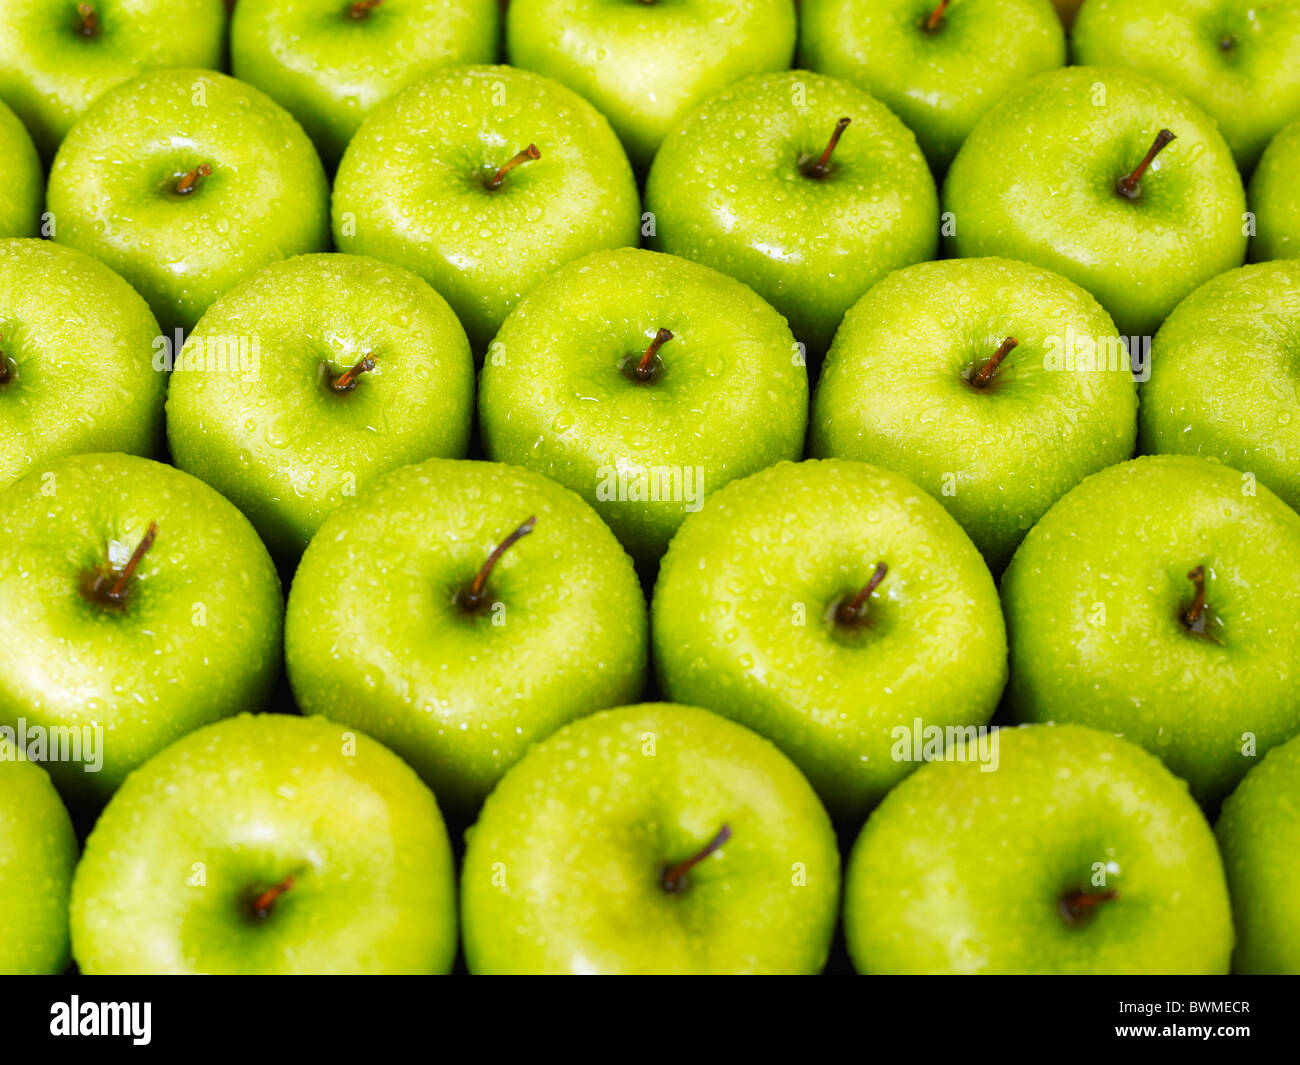 large group of green apples in a row. Horizontal shape Stock Photo